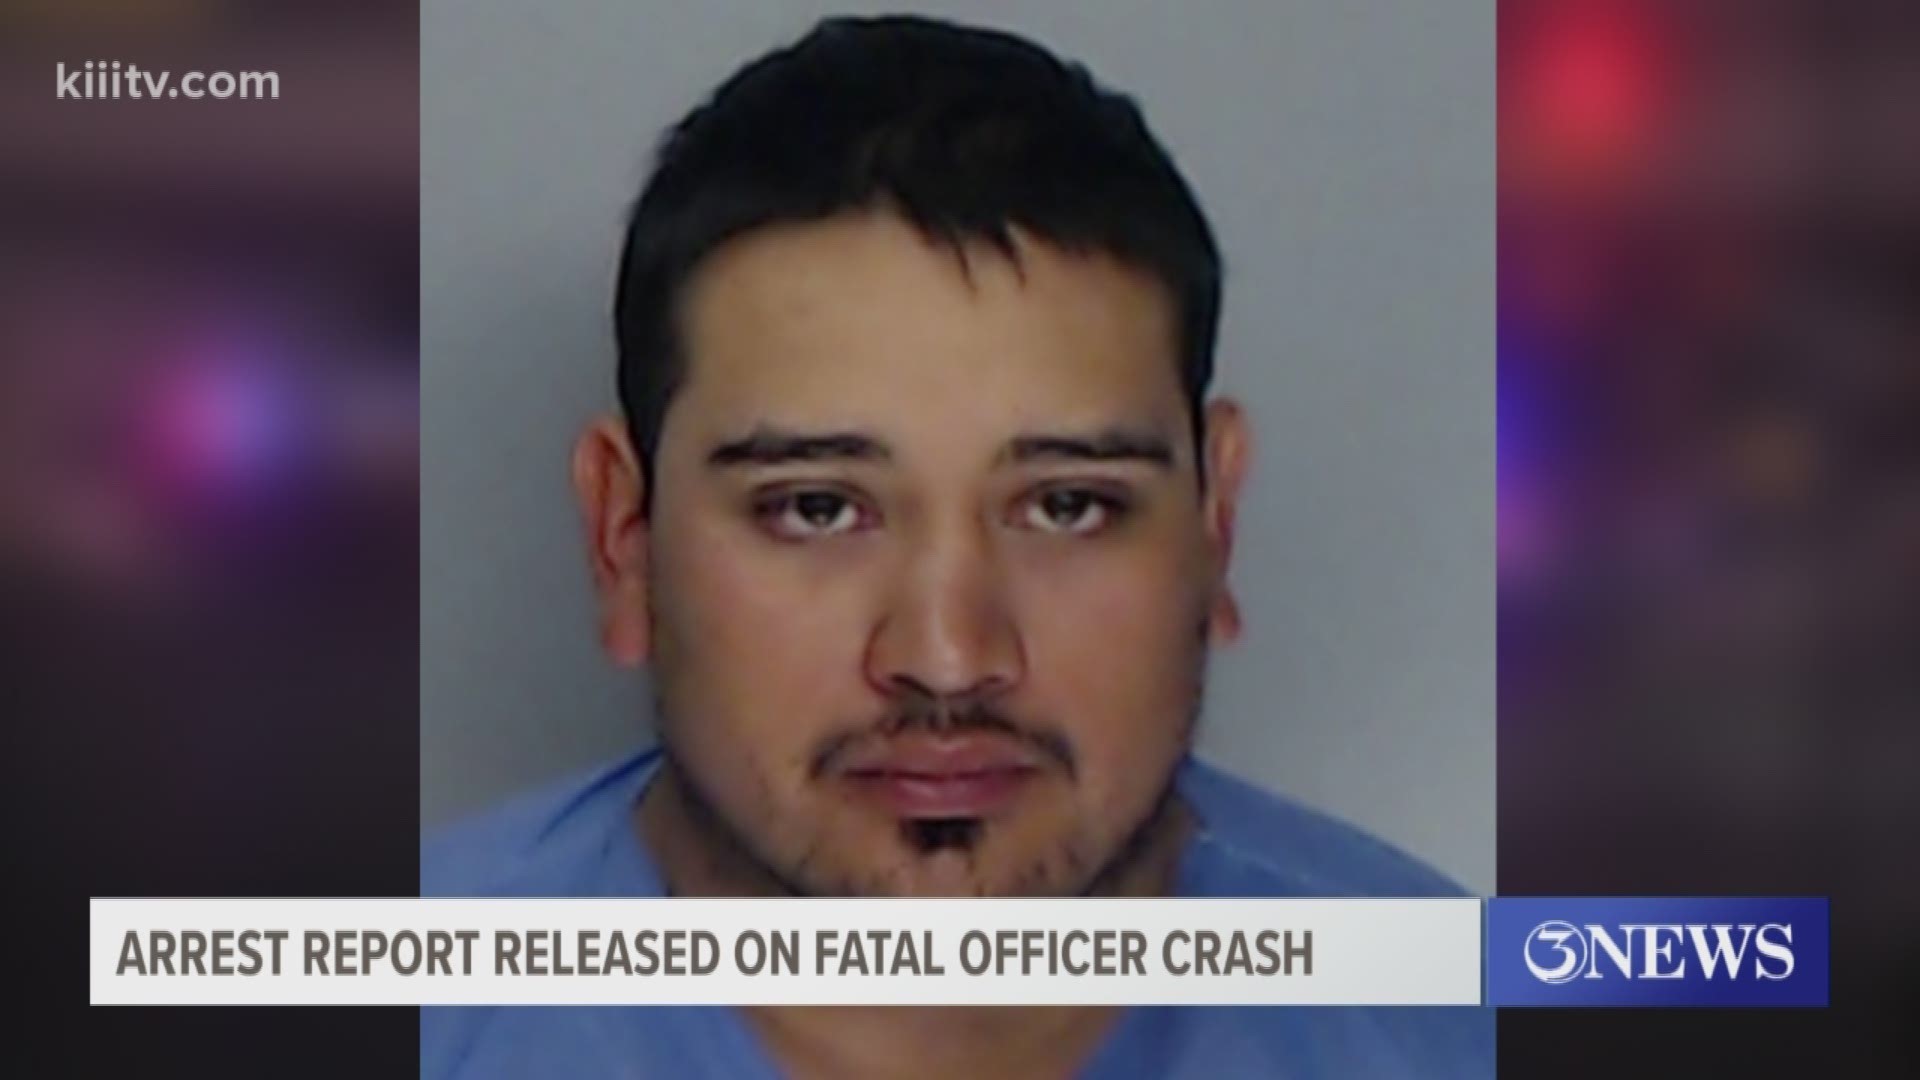 According to an arrest report, one of the first officers to get to the scene saw Brandon Portillo get out of the vehicle he was driving and attempt to walk away.